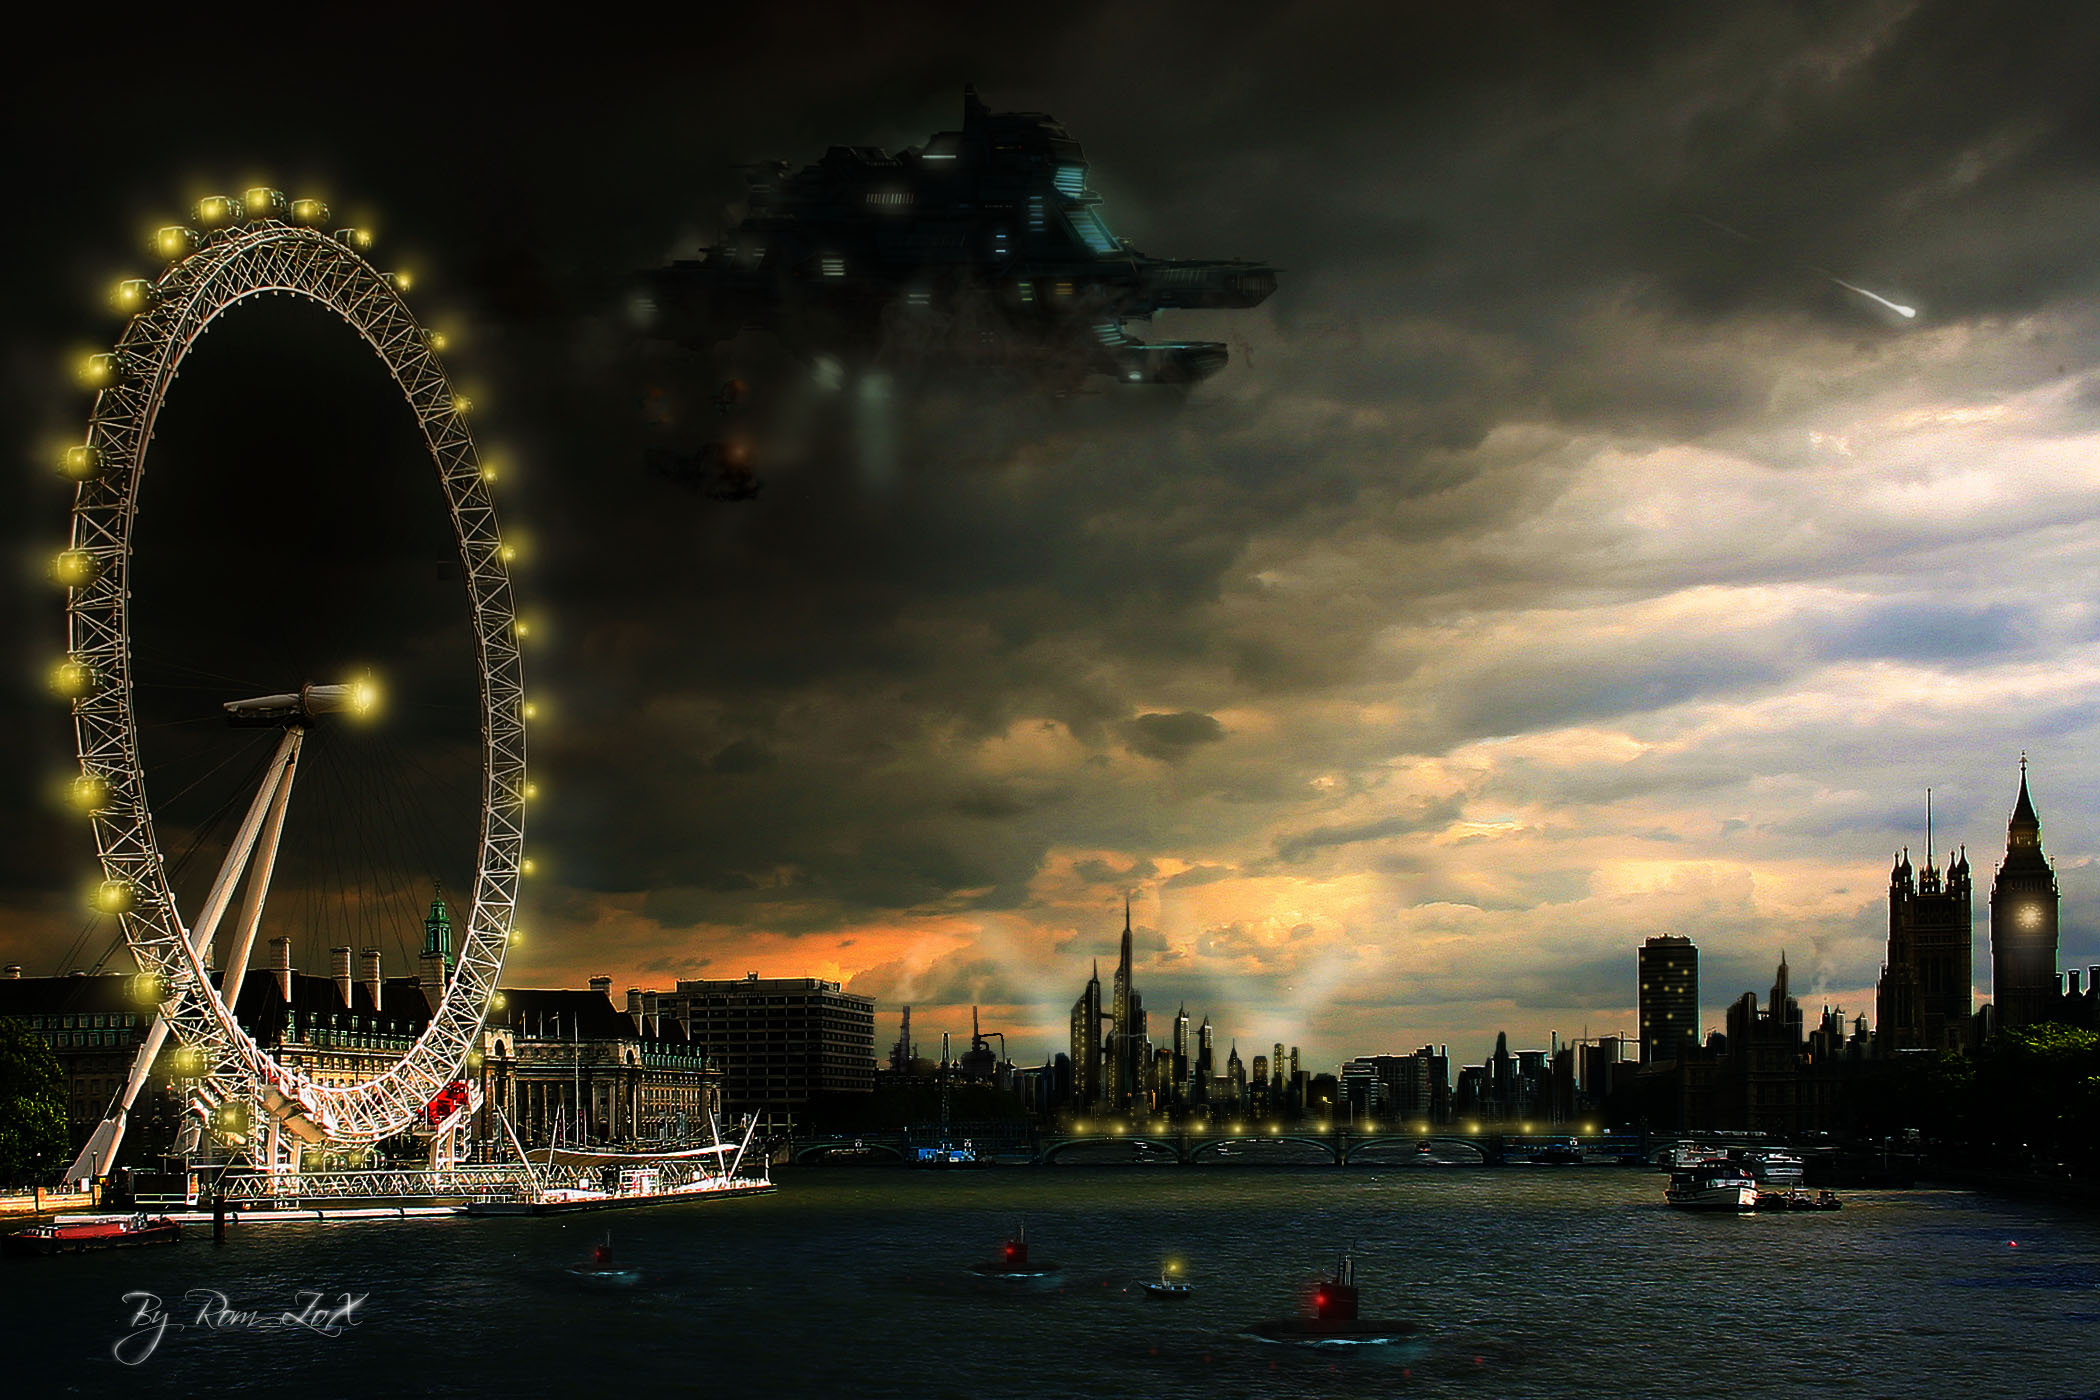 Ferris wheel and spaceship reflected in water